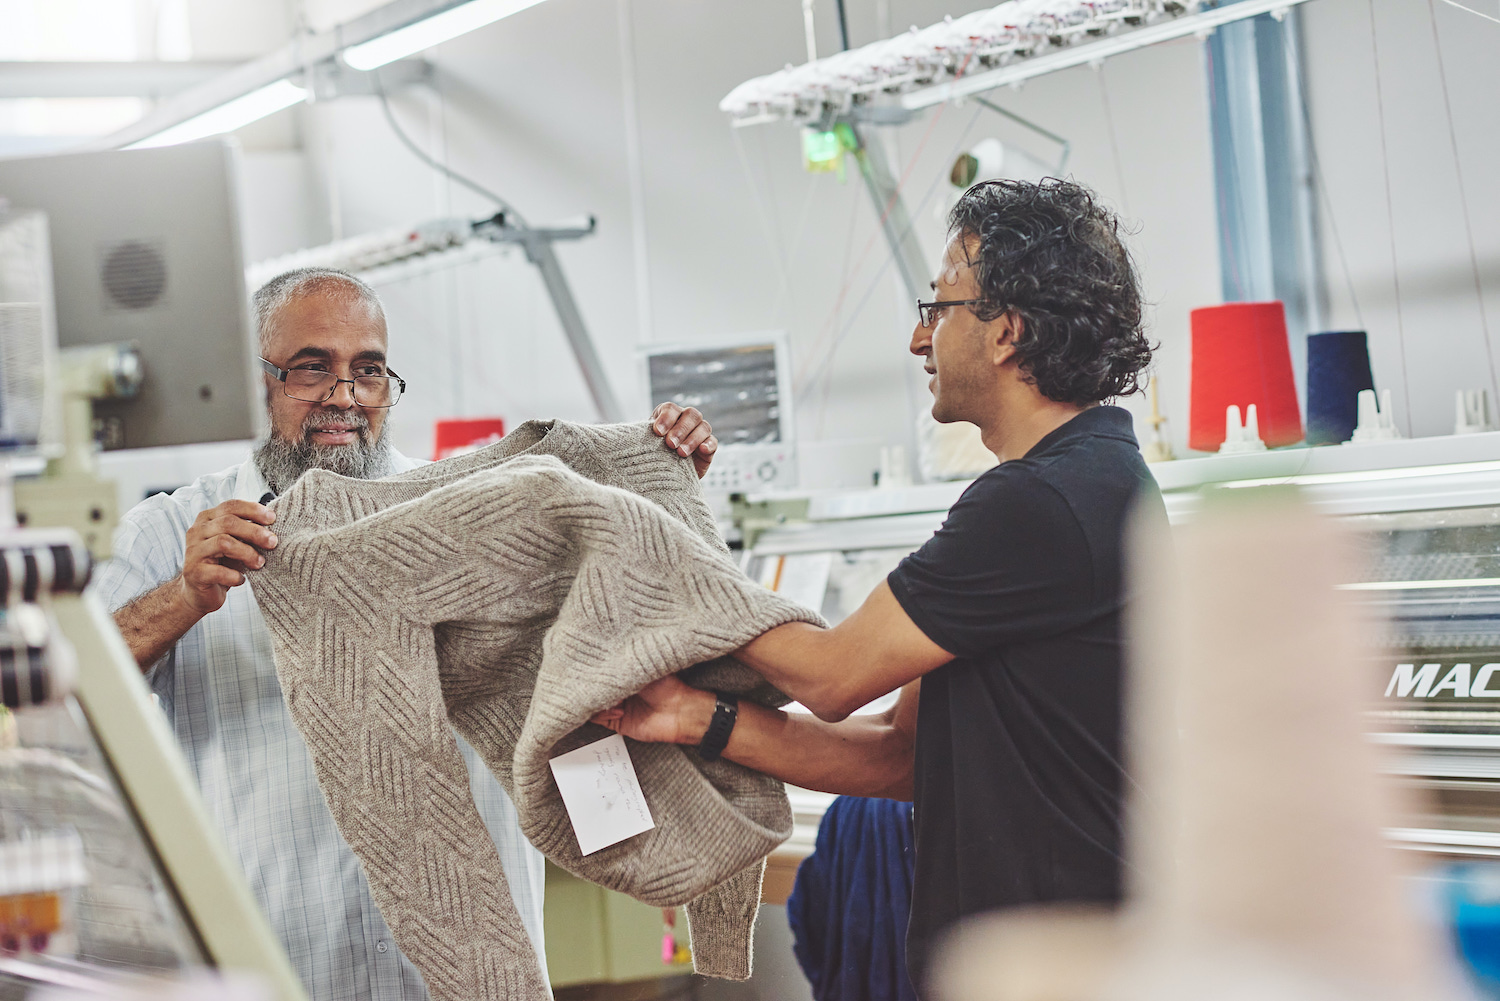 Snahal Patel, House of Sustainability’s founder and owner (right) inspects a seamfree garment. © House of Sustainability